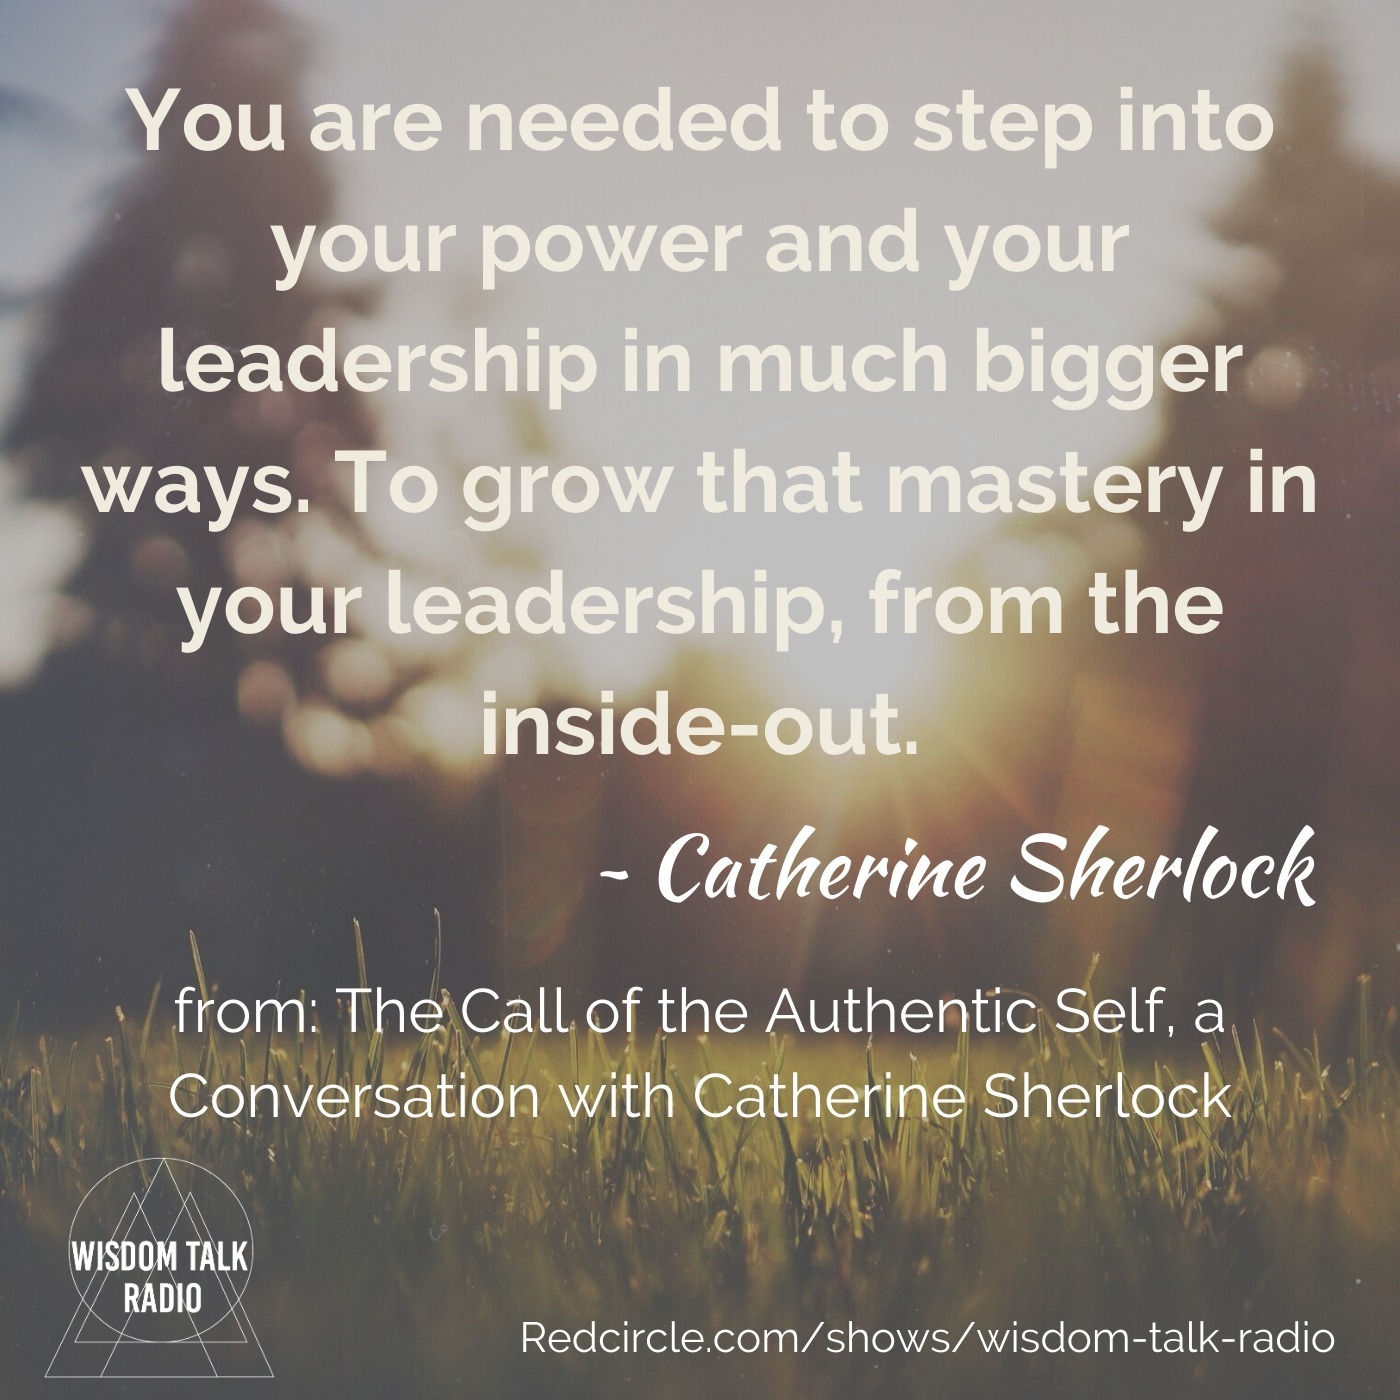 The Call of the Authentic Self, a Conversation with Catherine Sherlock